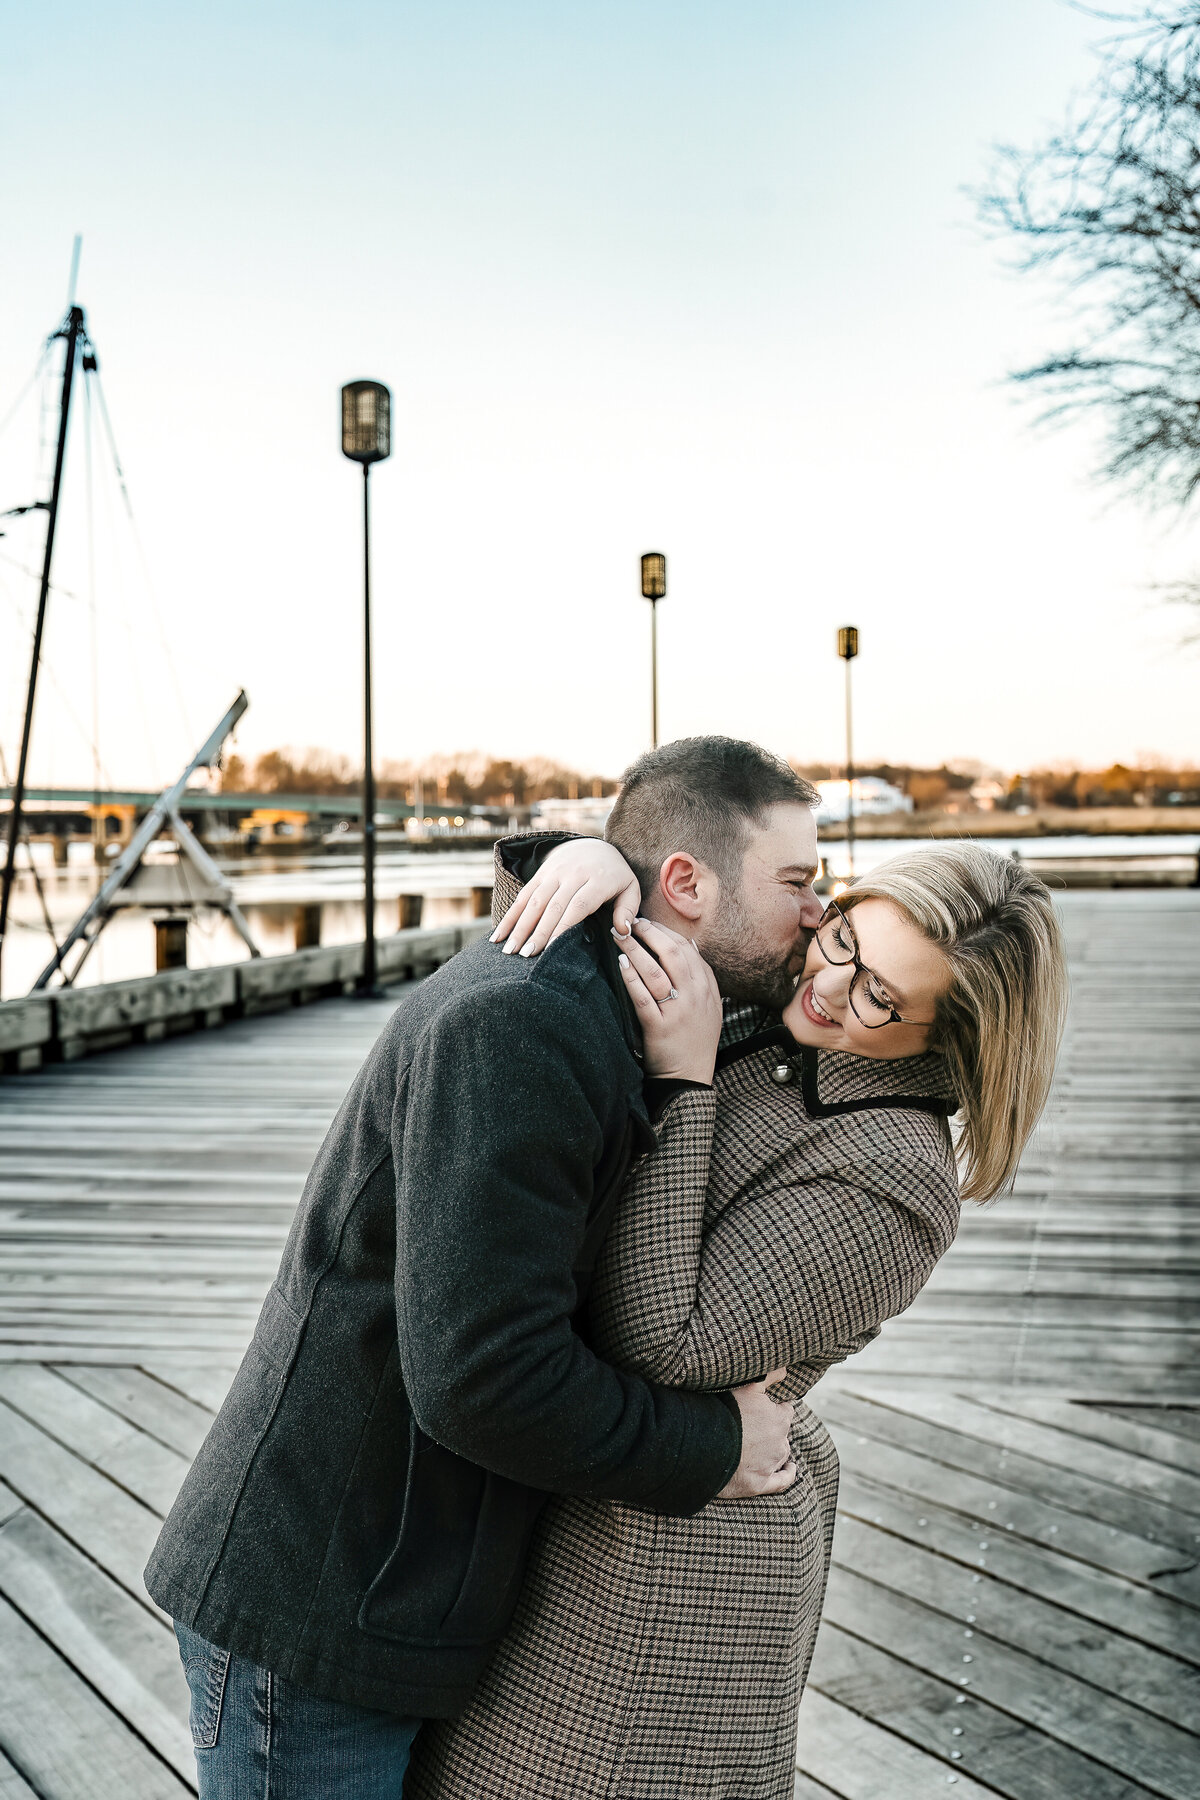 Love Captured: Enchanting engagement photos by Danielle Littles Photography, showcasing the genuine connection and joy of a beautiful couple embarking on their journey together.